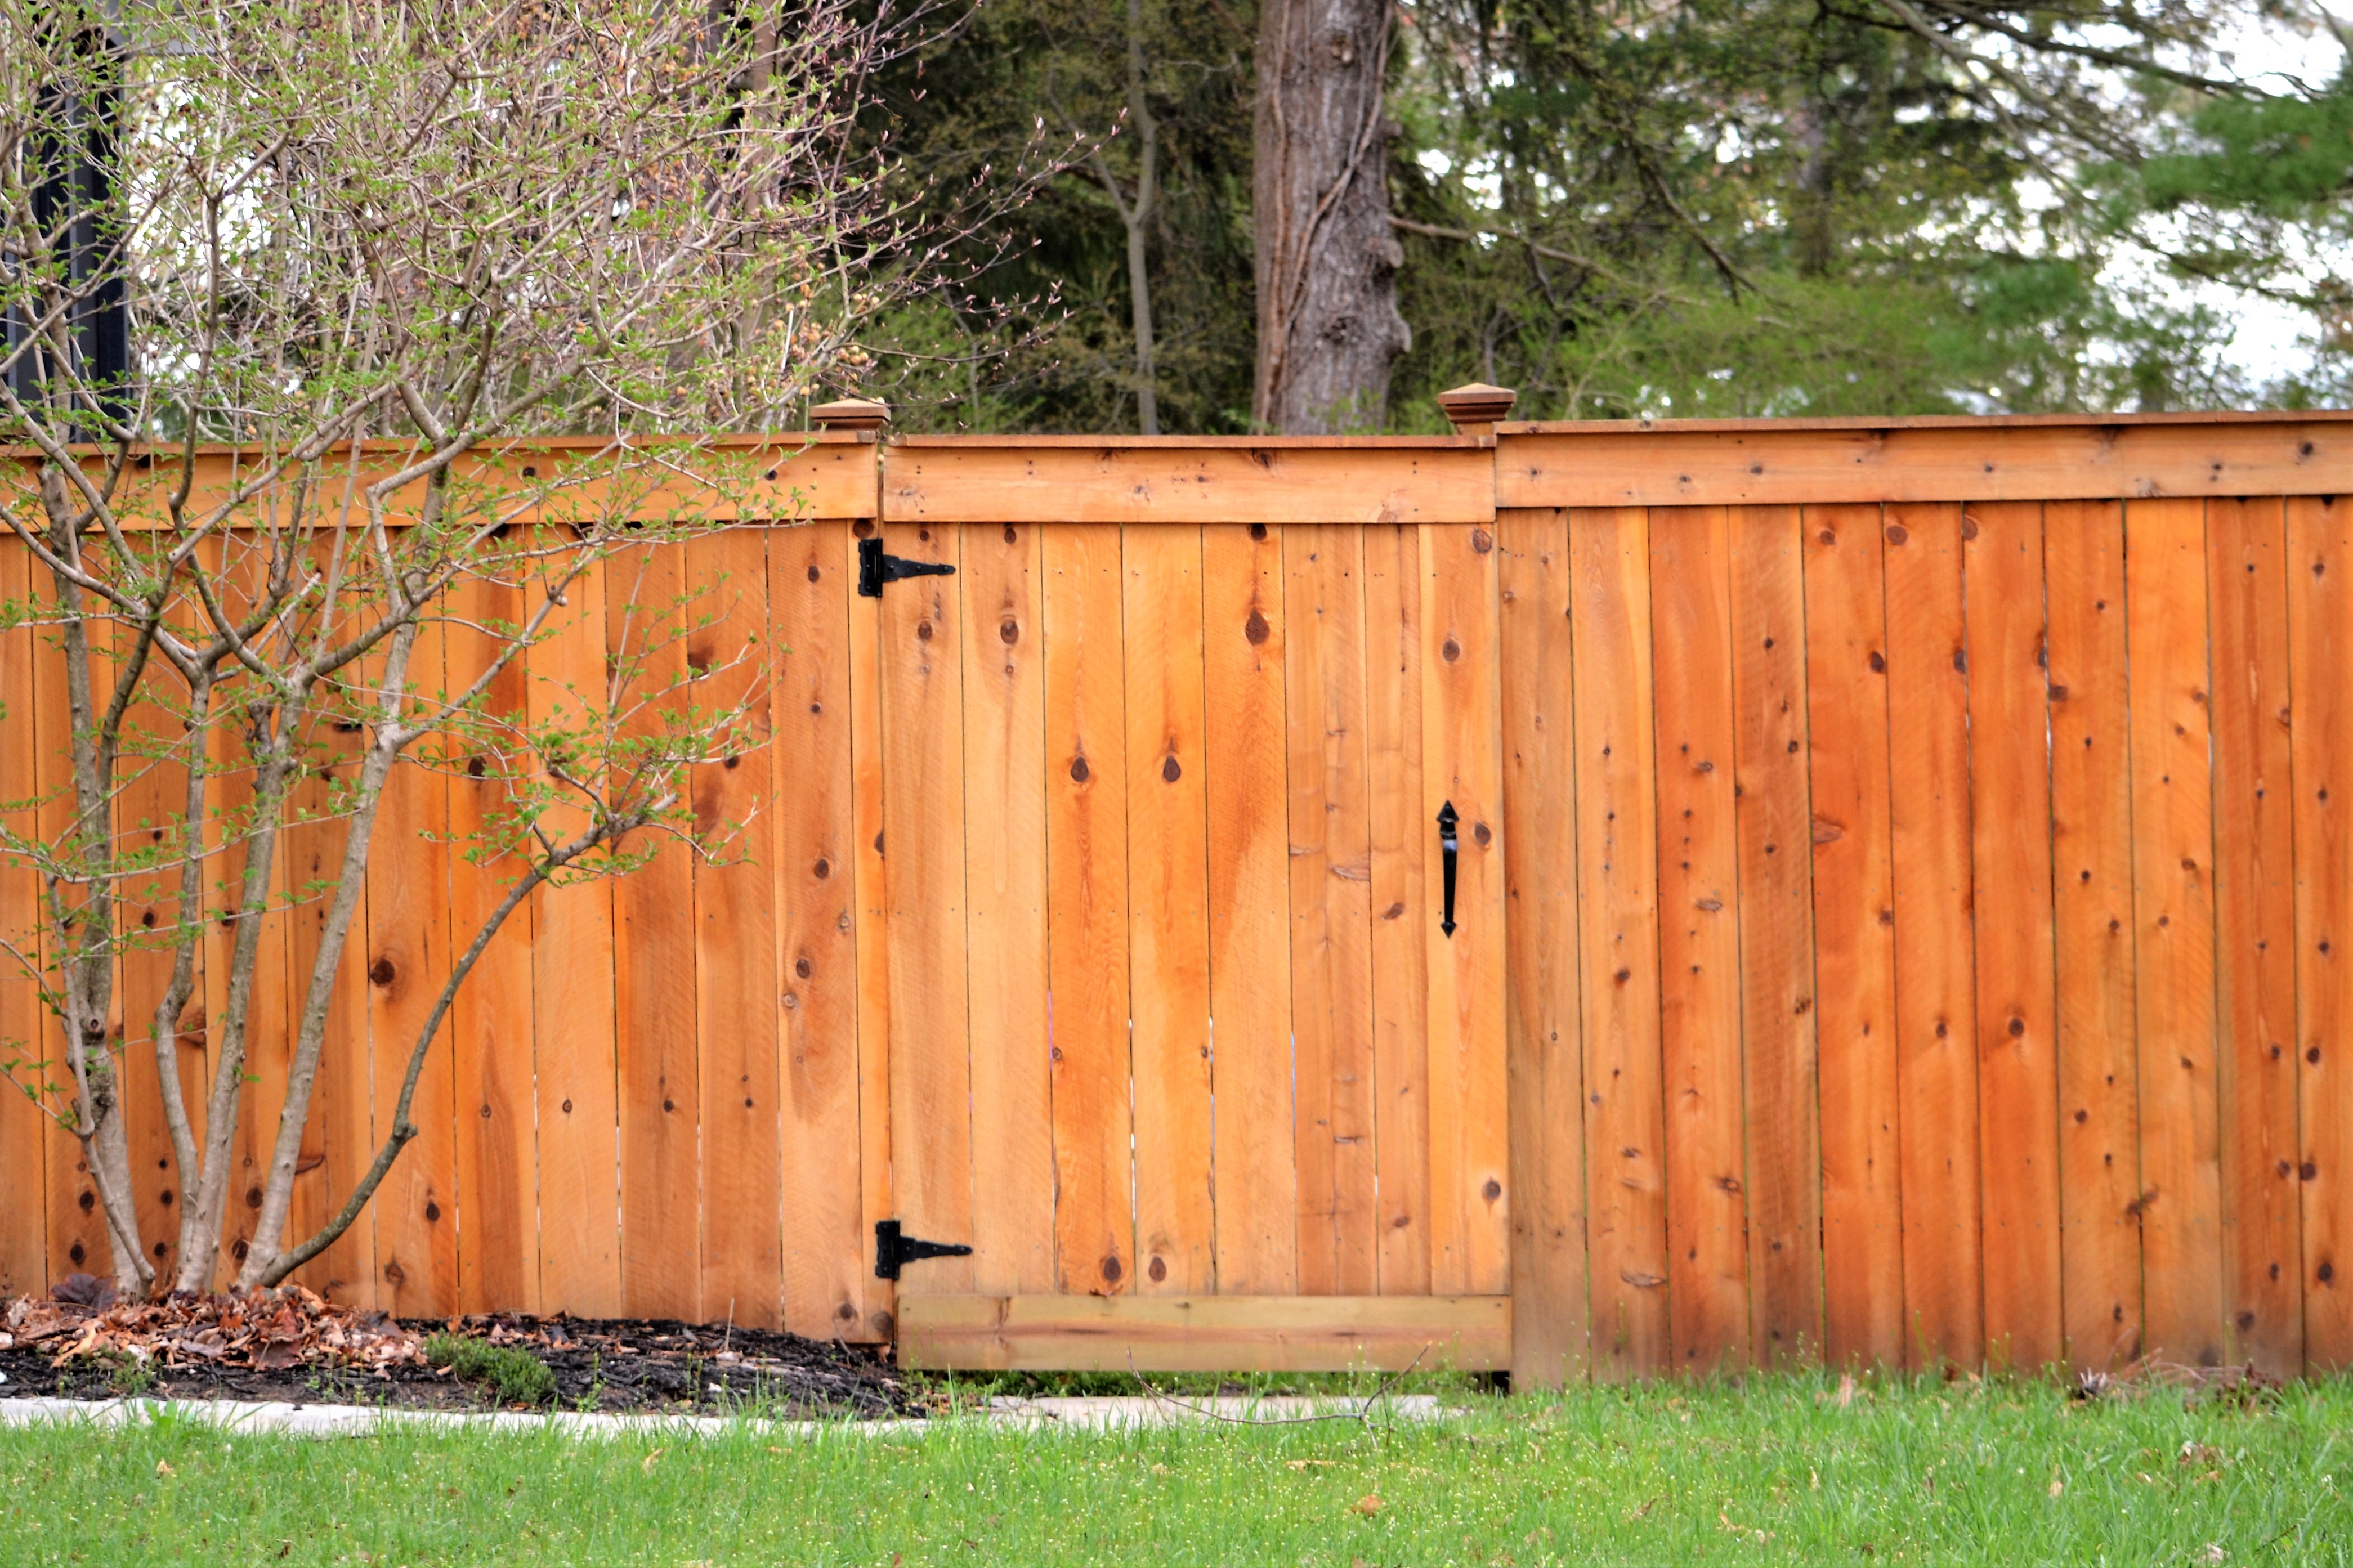 How to Stain a Fence: A Step-by-Step Guide